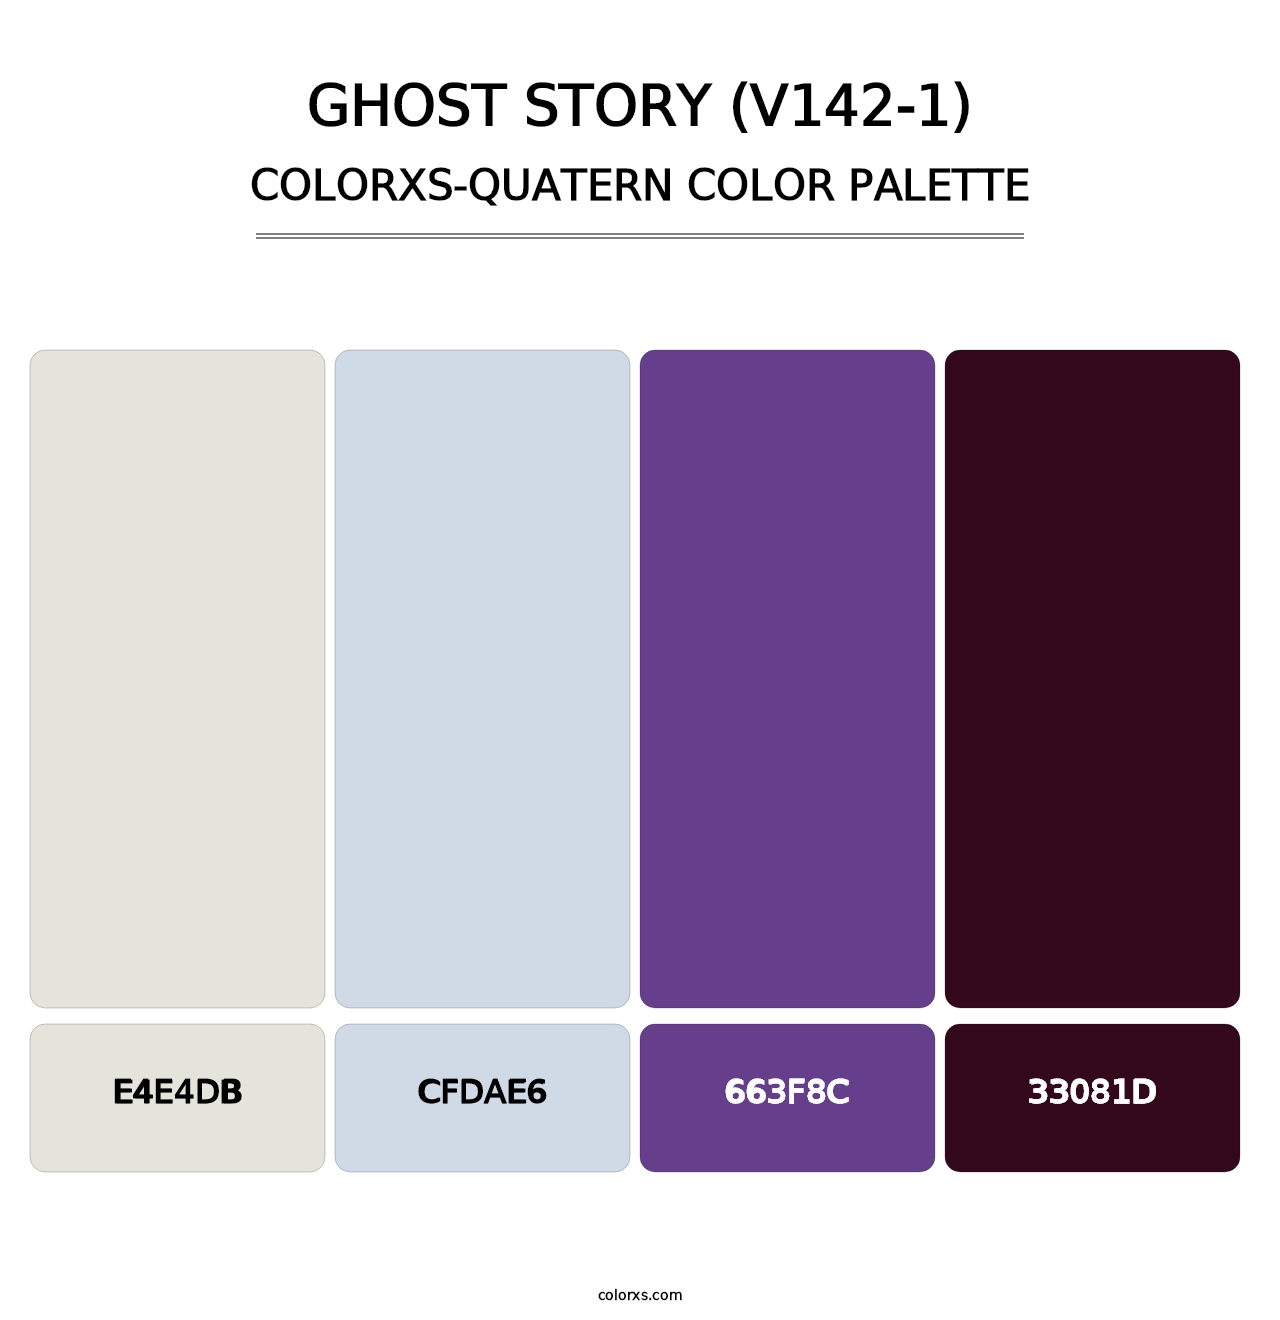 Ghost Story (V142-1) - Colorxs Quatern Palette